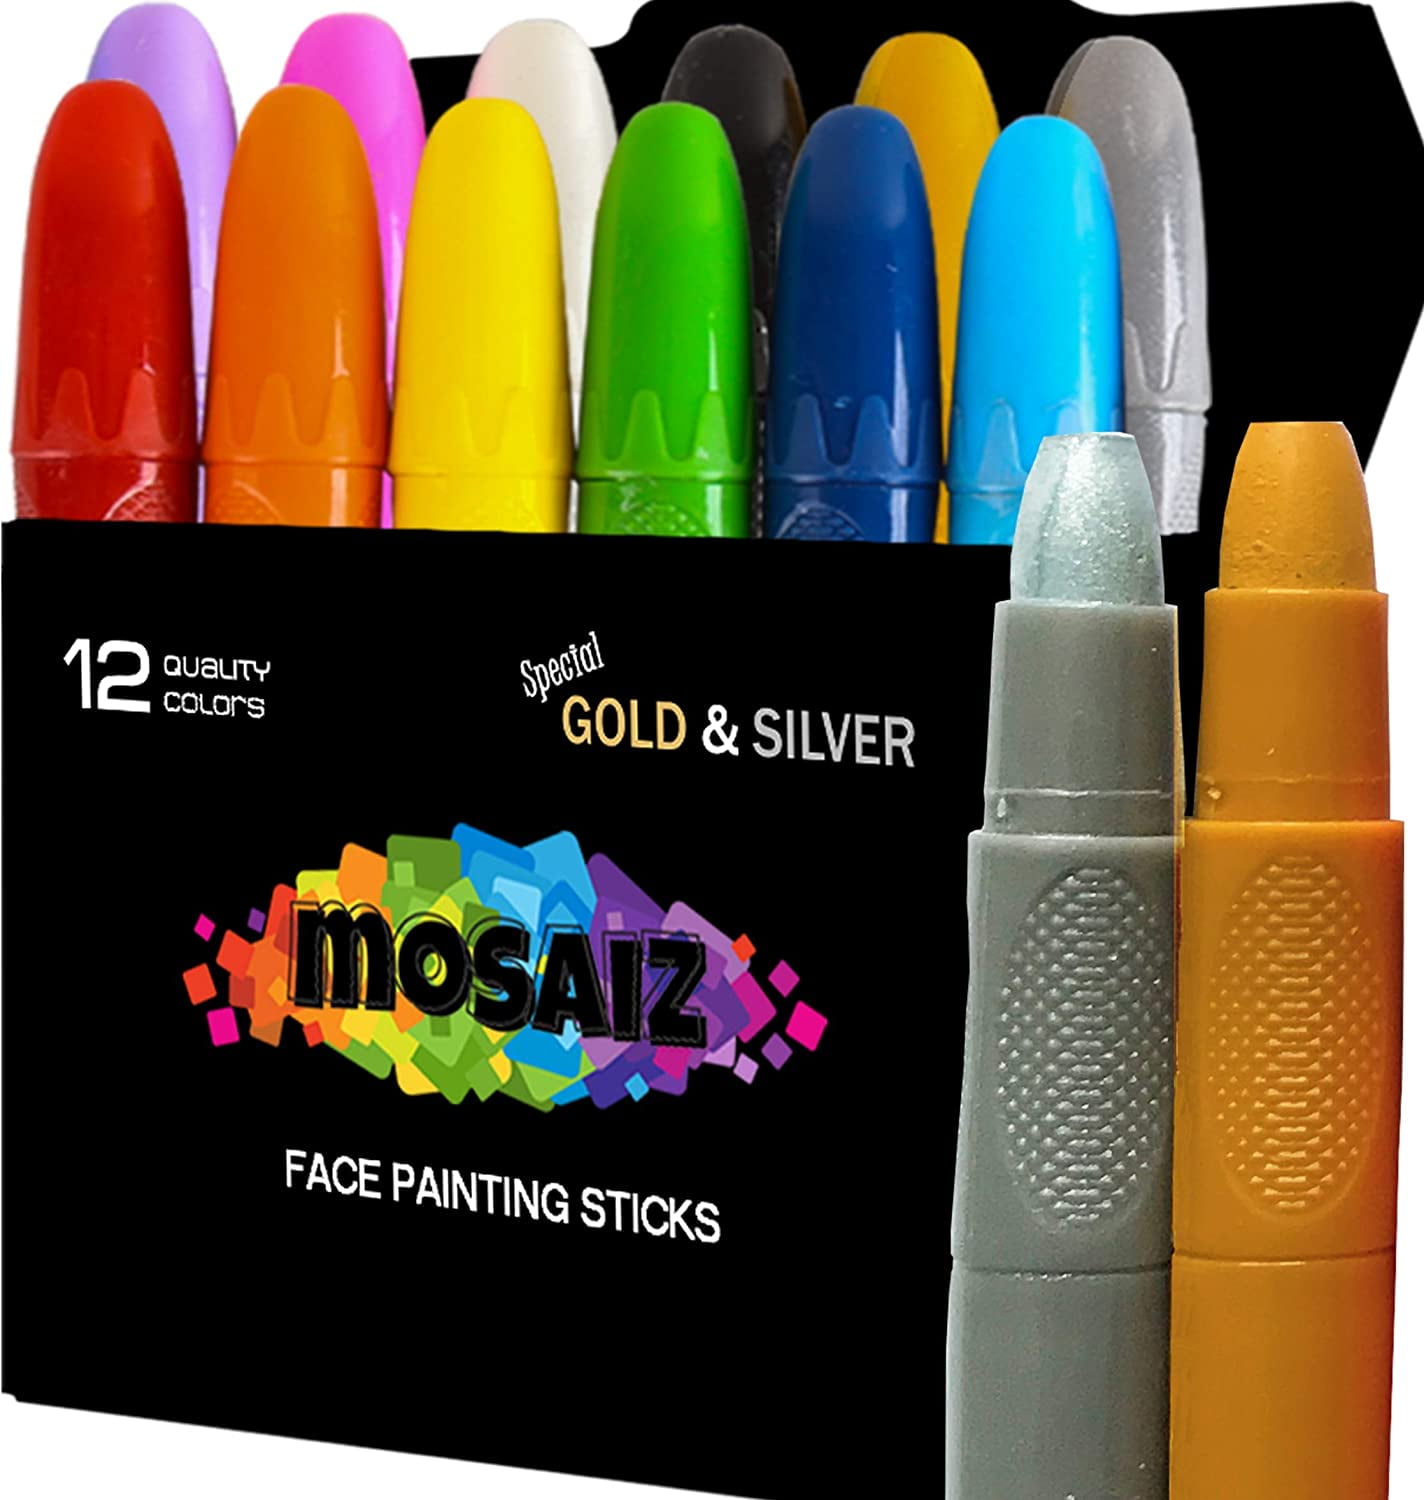 Mosaiz Face Painting Kits for Kids, 12 Colors Water Based Face Paint Kit,  Twistable and Washable Paint Sticks for Festival, Birthday, Purim, Halloween,  Cosplay Makeup and Body Paints for Adults - Walmart.com